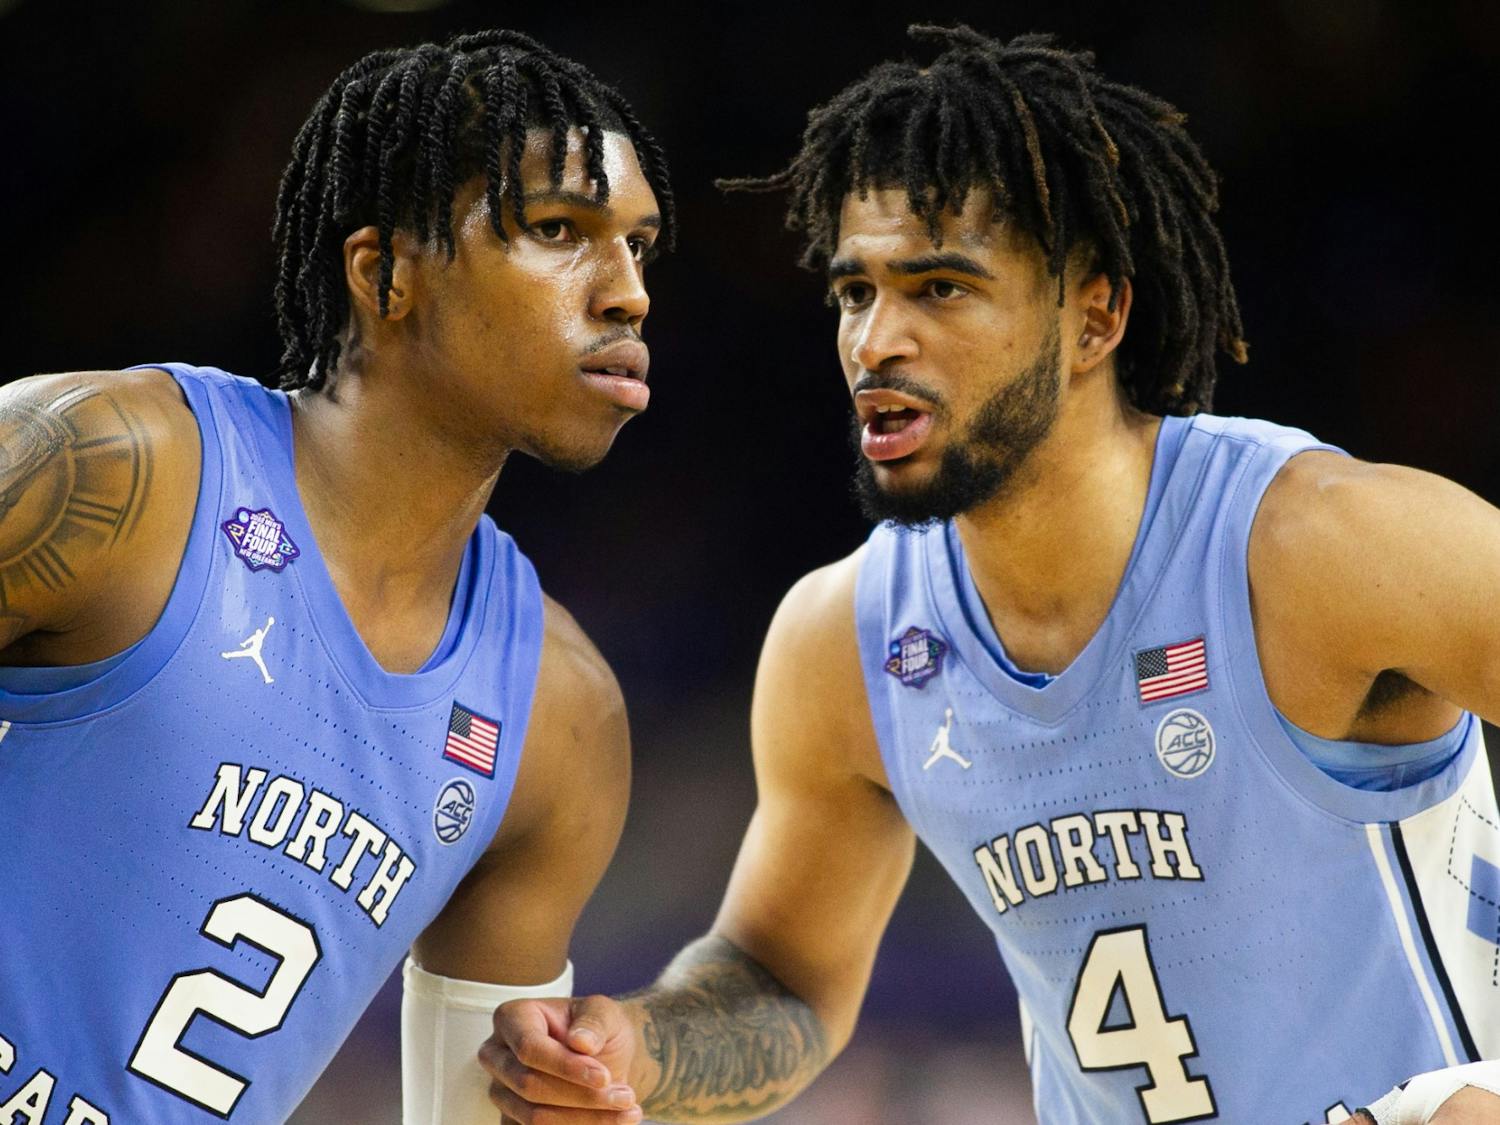 UNC sophomore guards Caleb Love (2) and RJ Davis (4) prepare for the final seconds of the Final Four of the NCAA Tournament against Duke in New Orleans on Saturday, April 2, 2022. UNC won 81-77.